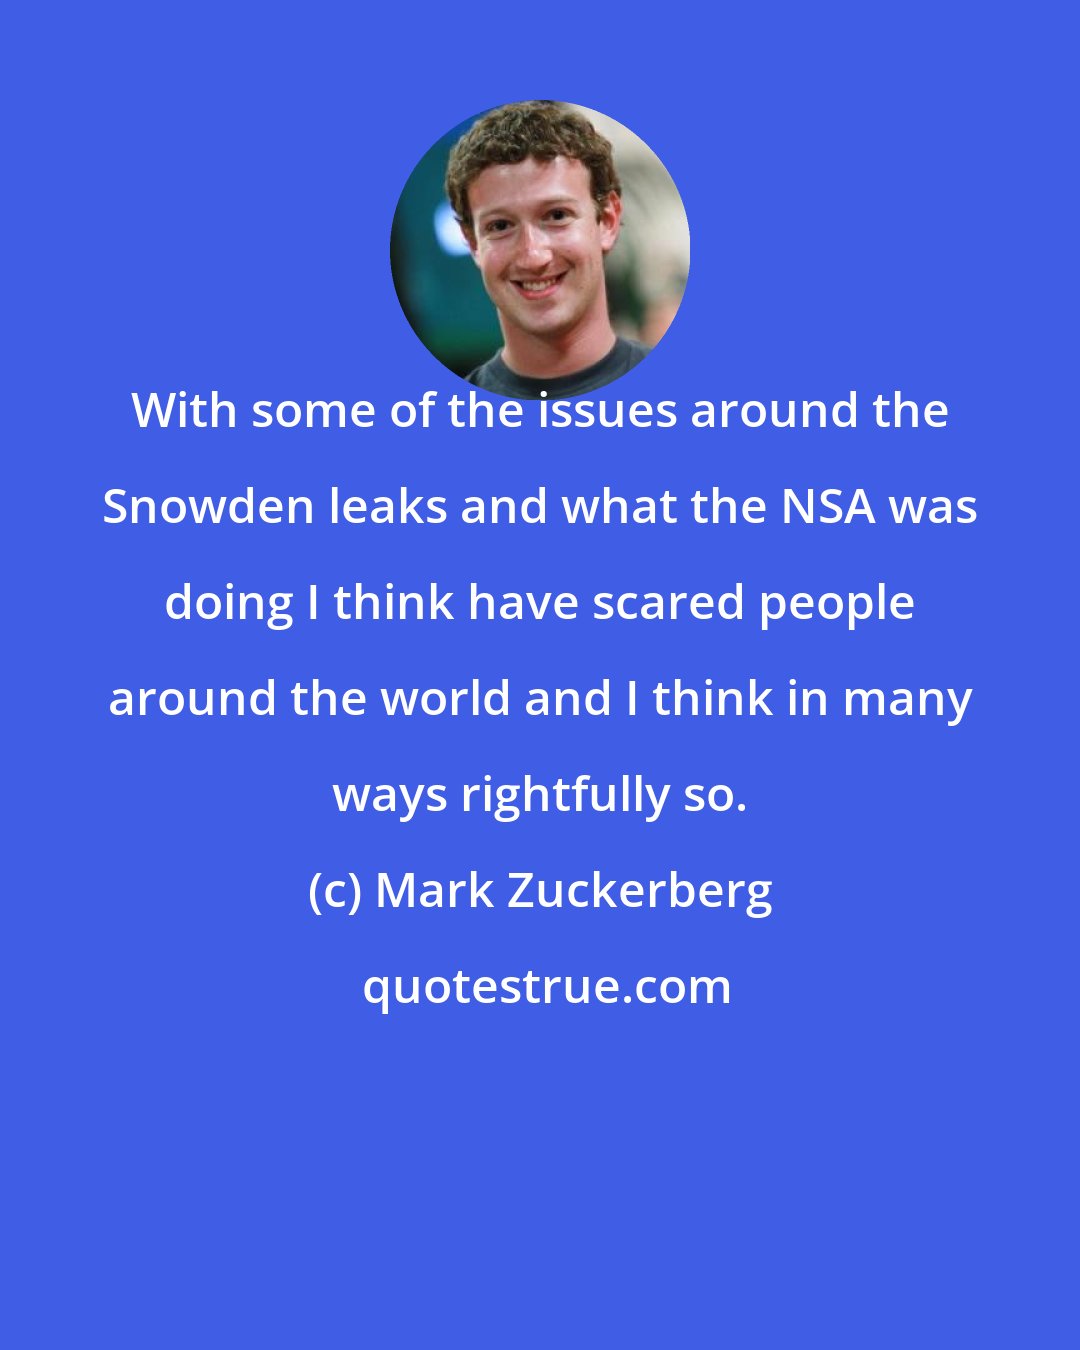 Mark Zuckerberg: With some of the issues around the Snowden leaks and what the NSA was doing I think have scared people around the world and I think in many ways rightfully so.